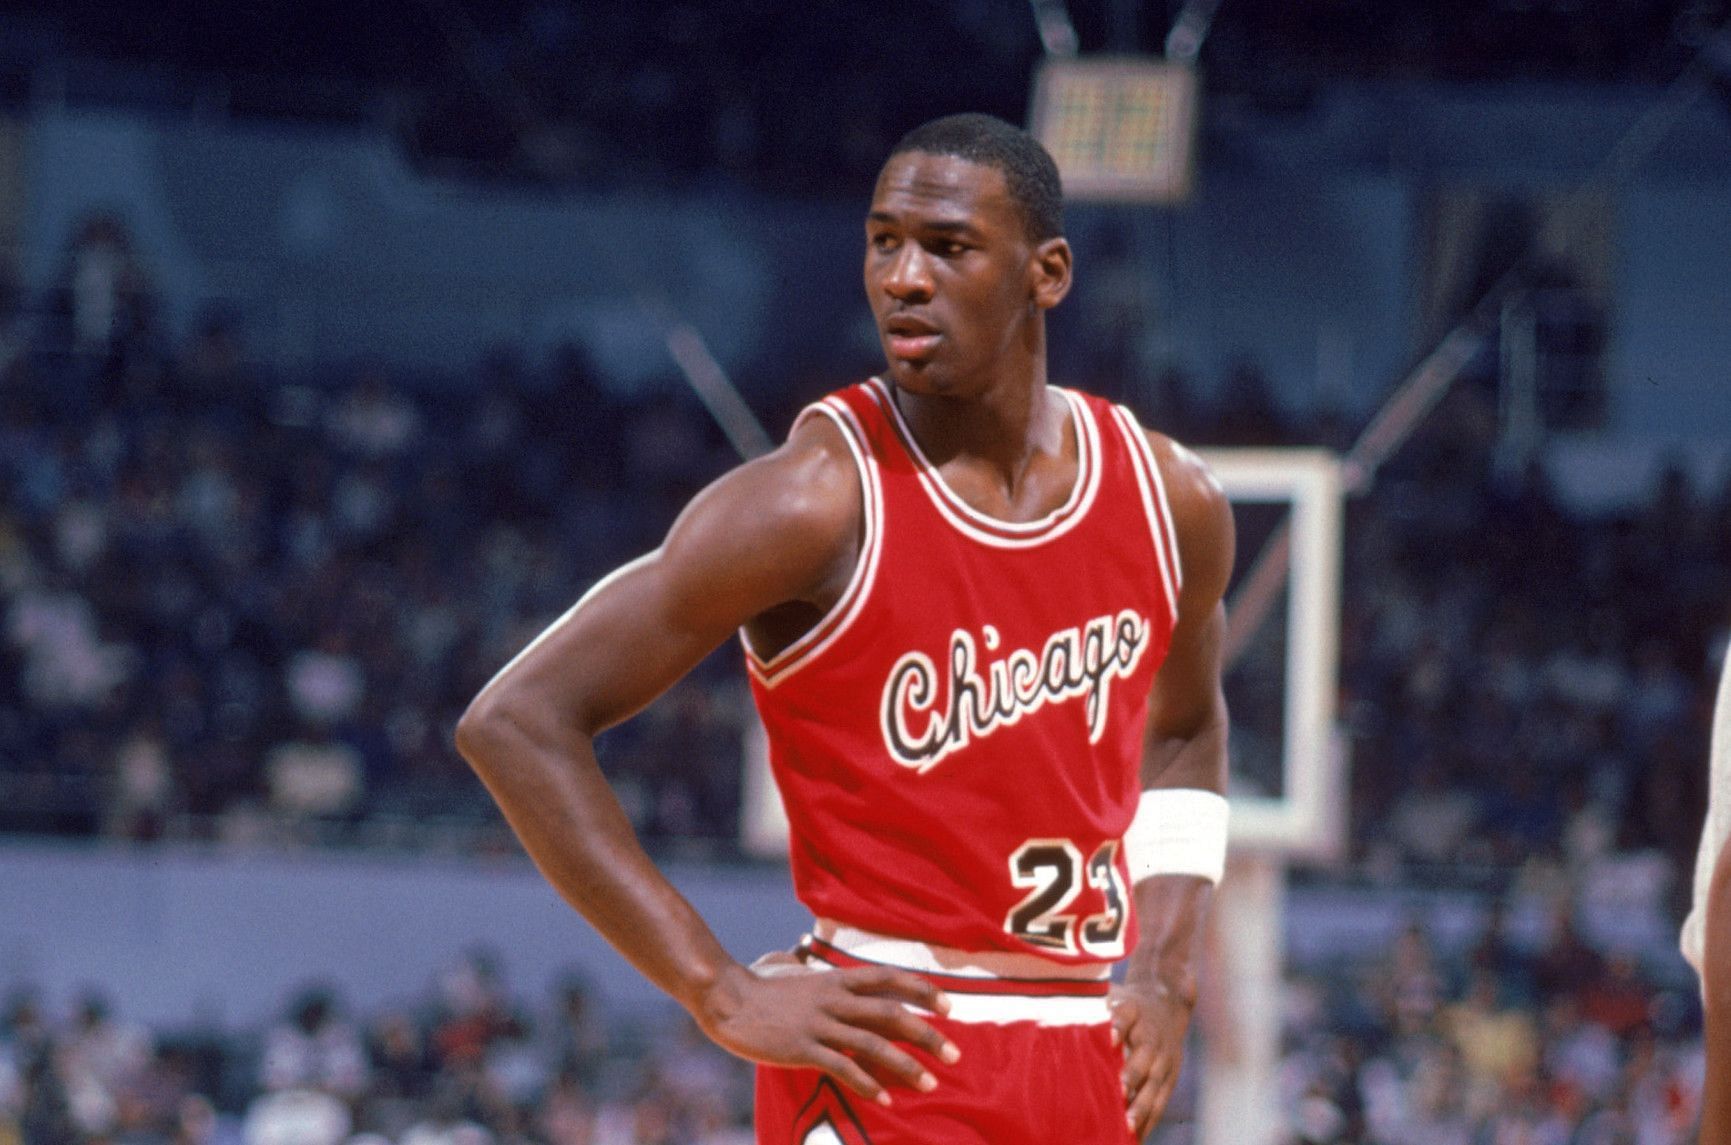 Michael Jordan draft: Taking a look MJ's player when he was drafted No. 3